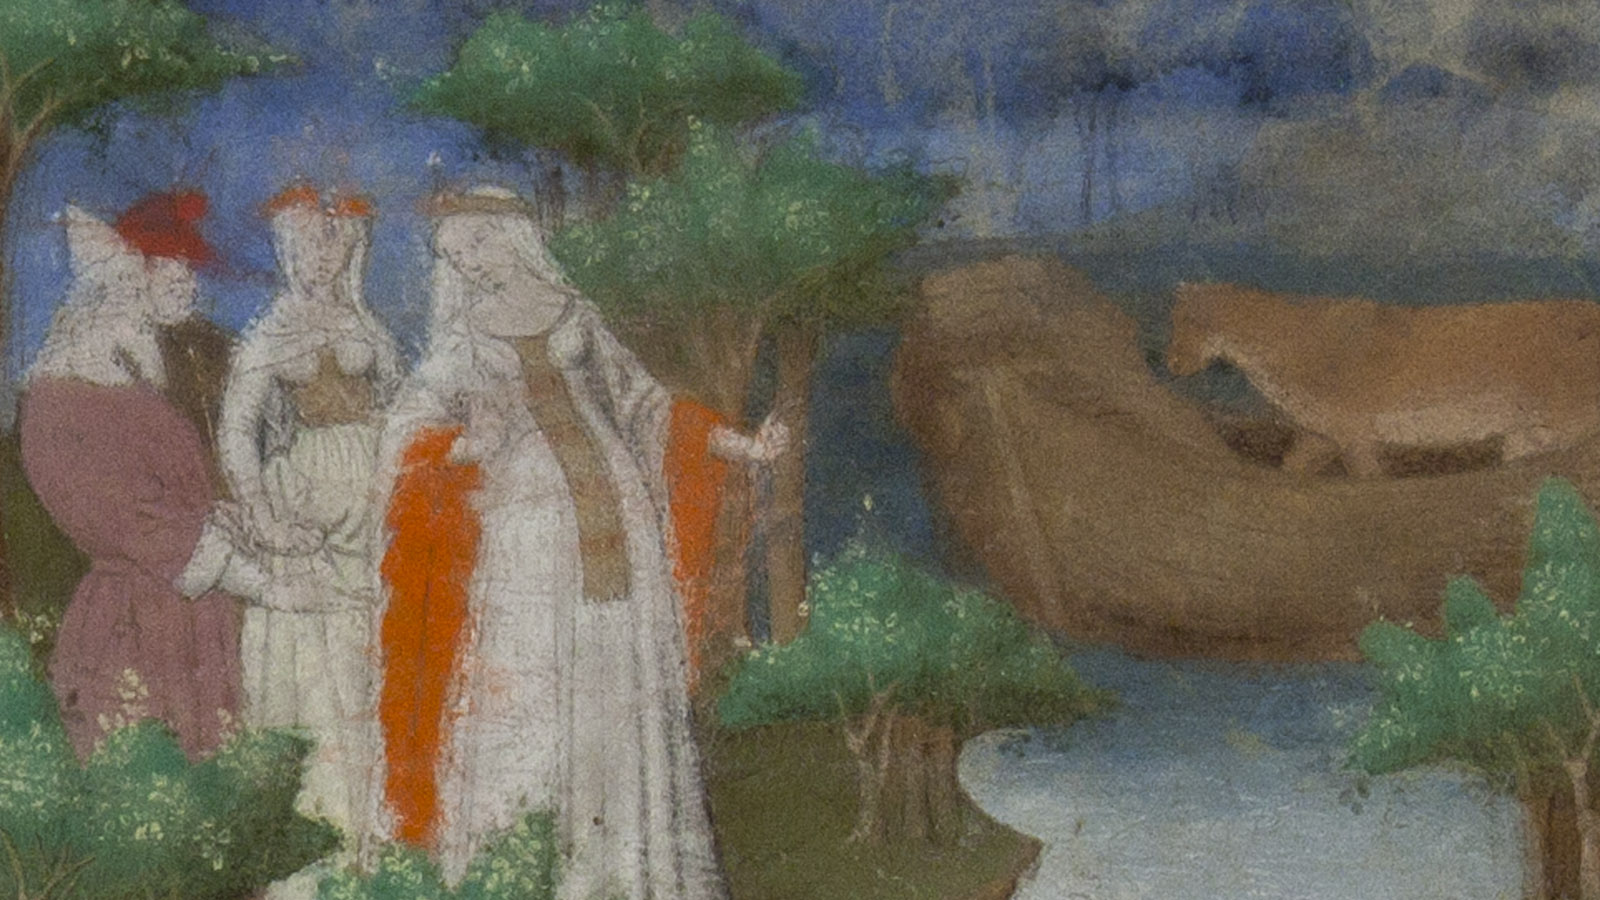 Giovanni Boccaccio, Des clères et nobles femmes, illumination depicting Isis, Queen of Egypt, and Juno pointing out the boat with Io transformed into a cow, painted by the Boucicaut Master, Paris, c. 1410-15. Calouste Gulbenkian Museum.